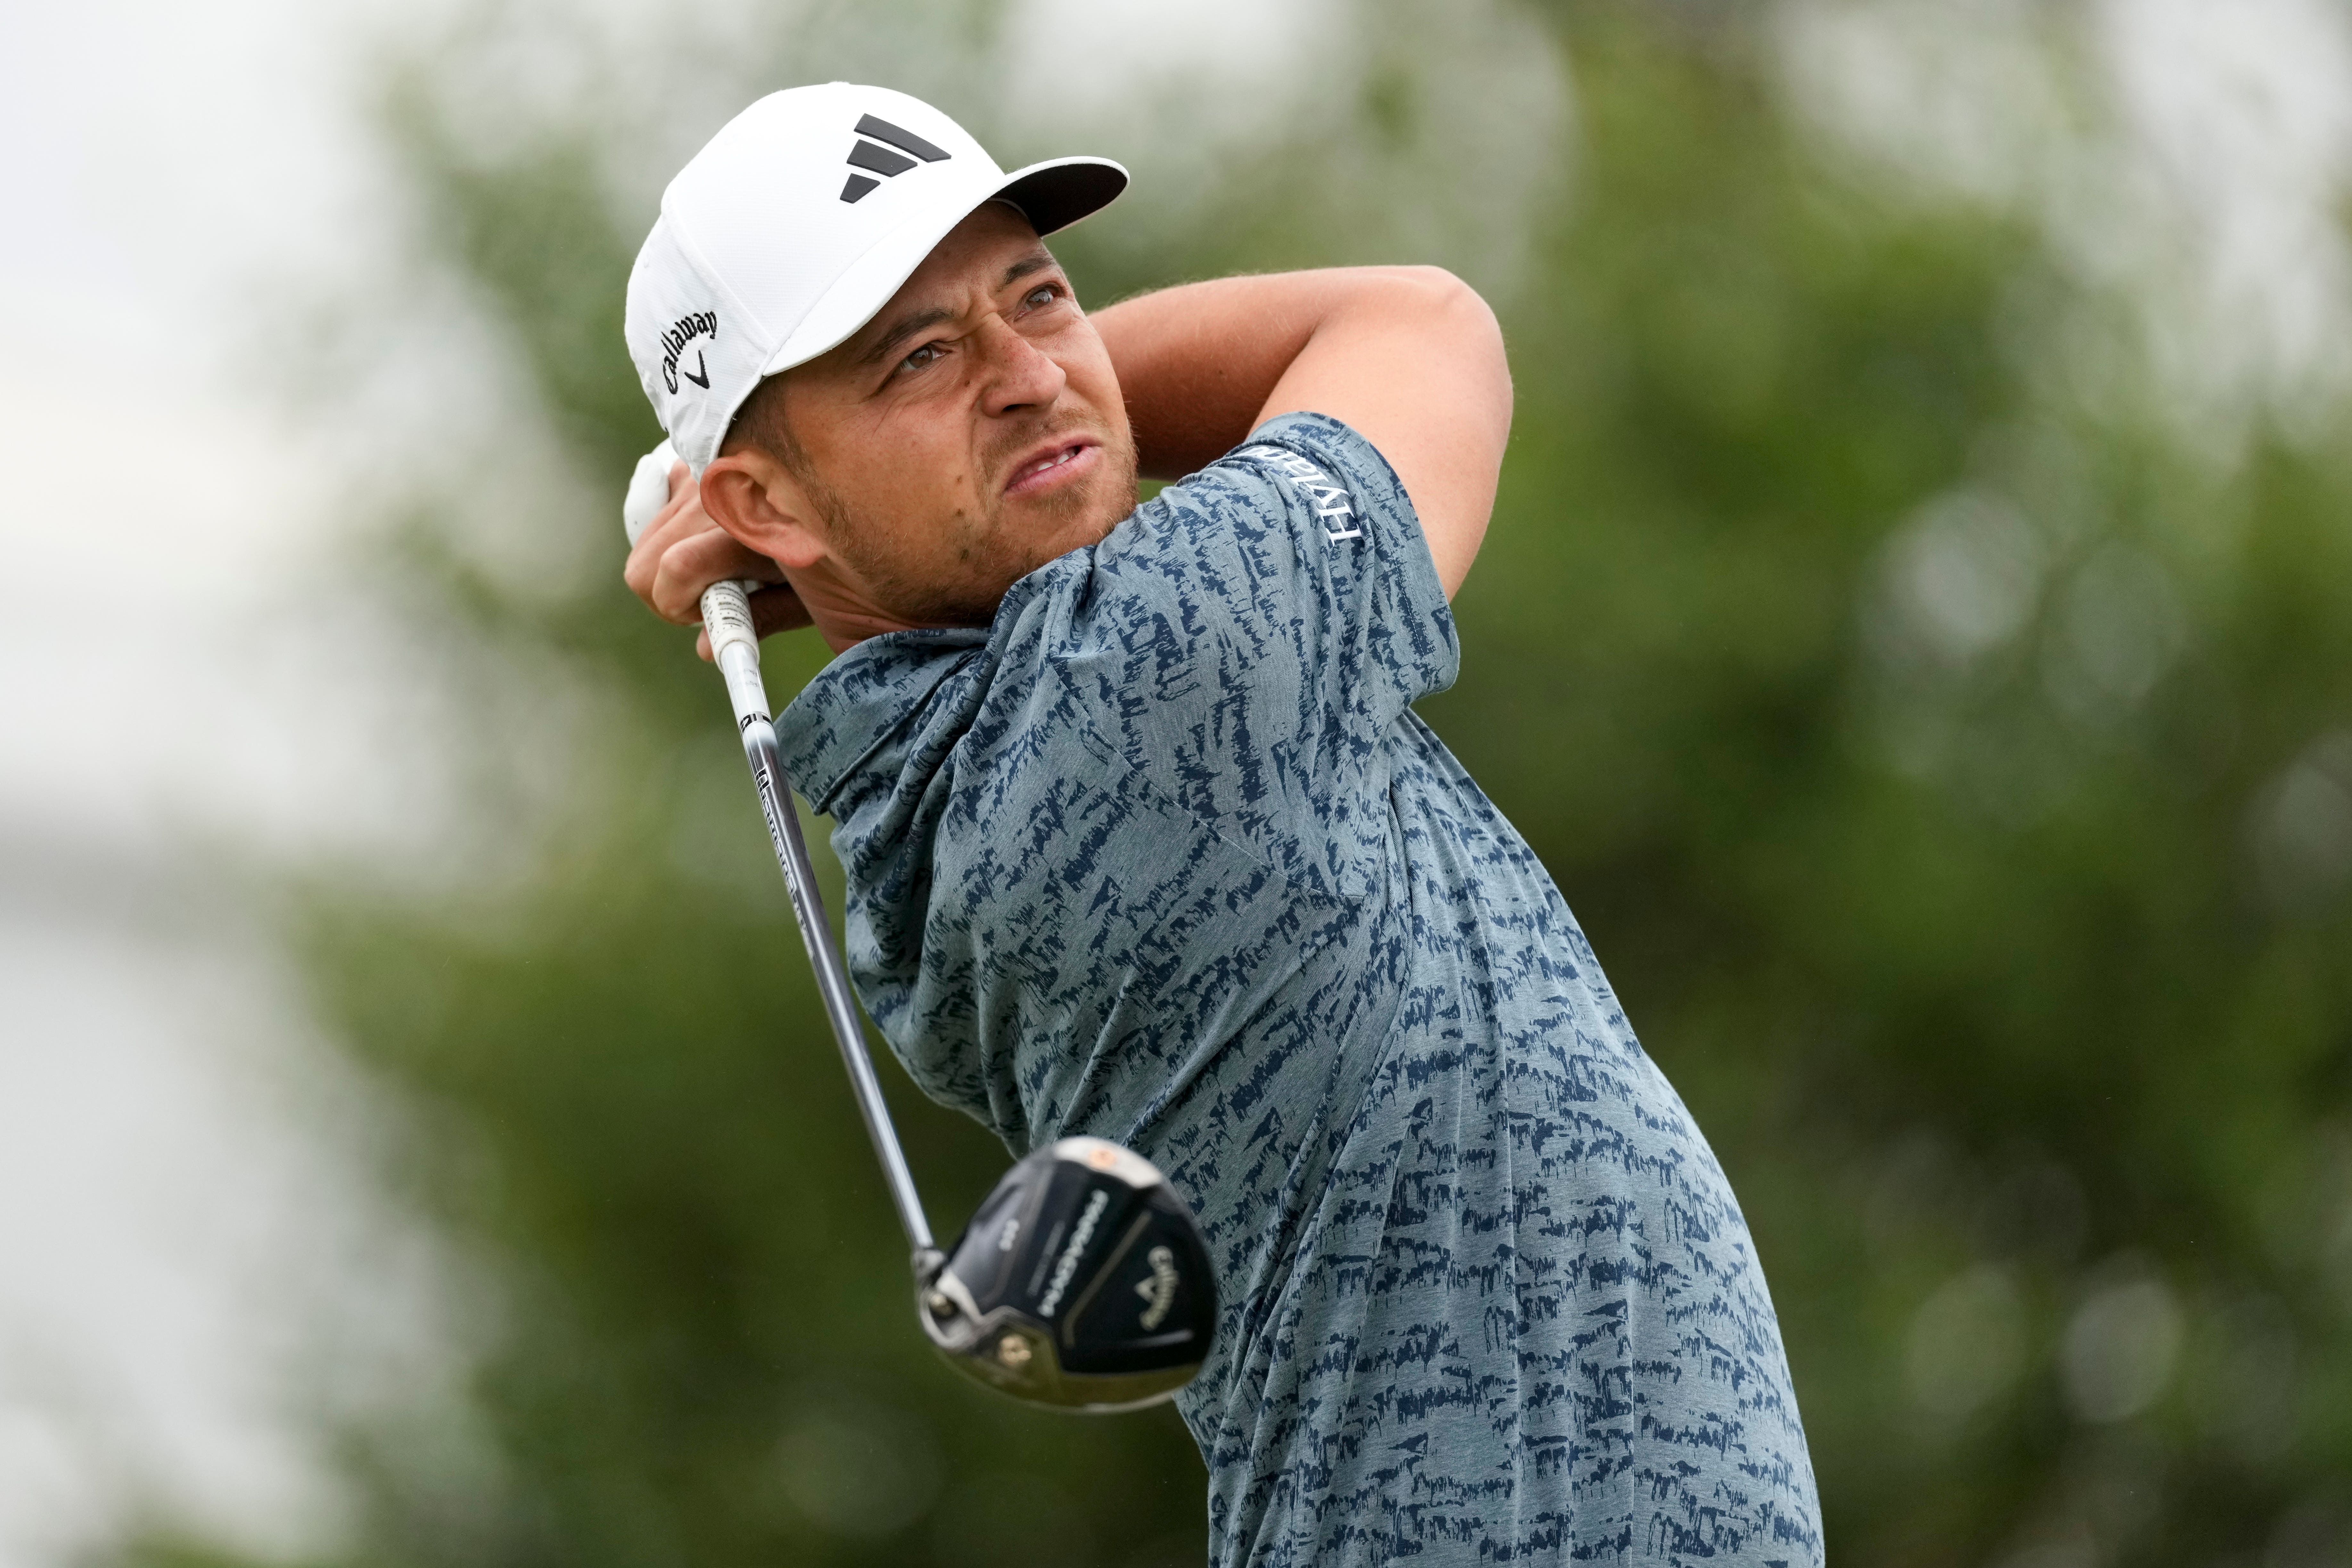 Xander Schauffele matched compatriot Rickie Fowler’s 62 on a record day of scoring in the US Open (Marcio J Sanchez/AP)